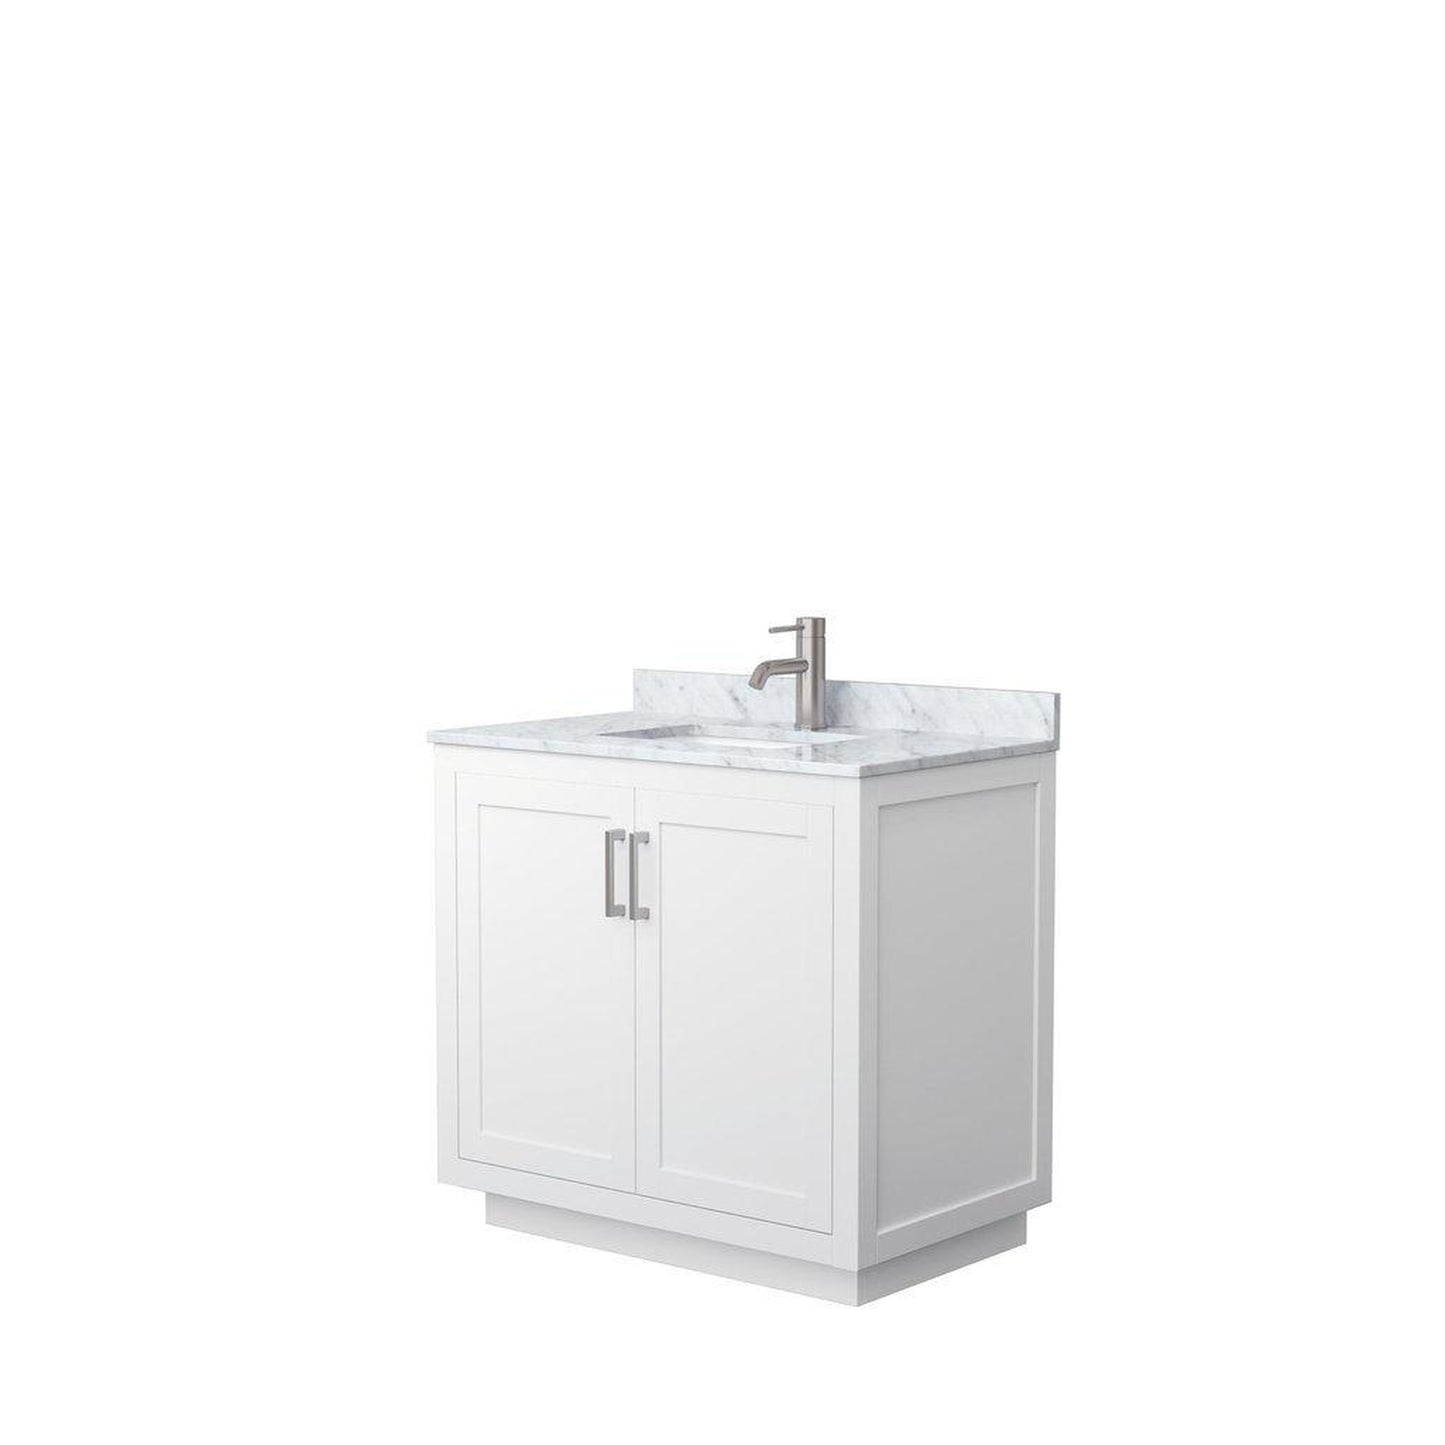 Wyndham Collection Miranda 36" Single Bathroom White Vanity Set With White Carrara Marble Countertop, Undermount Square Sink, And Brushed Nickel Trim